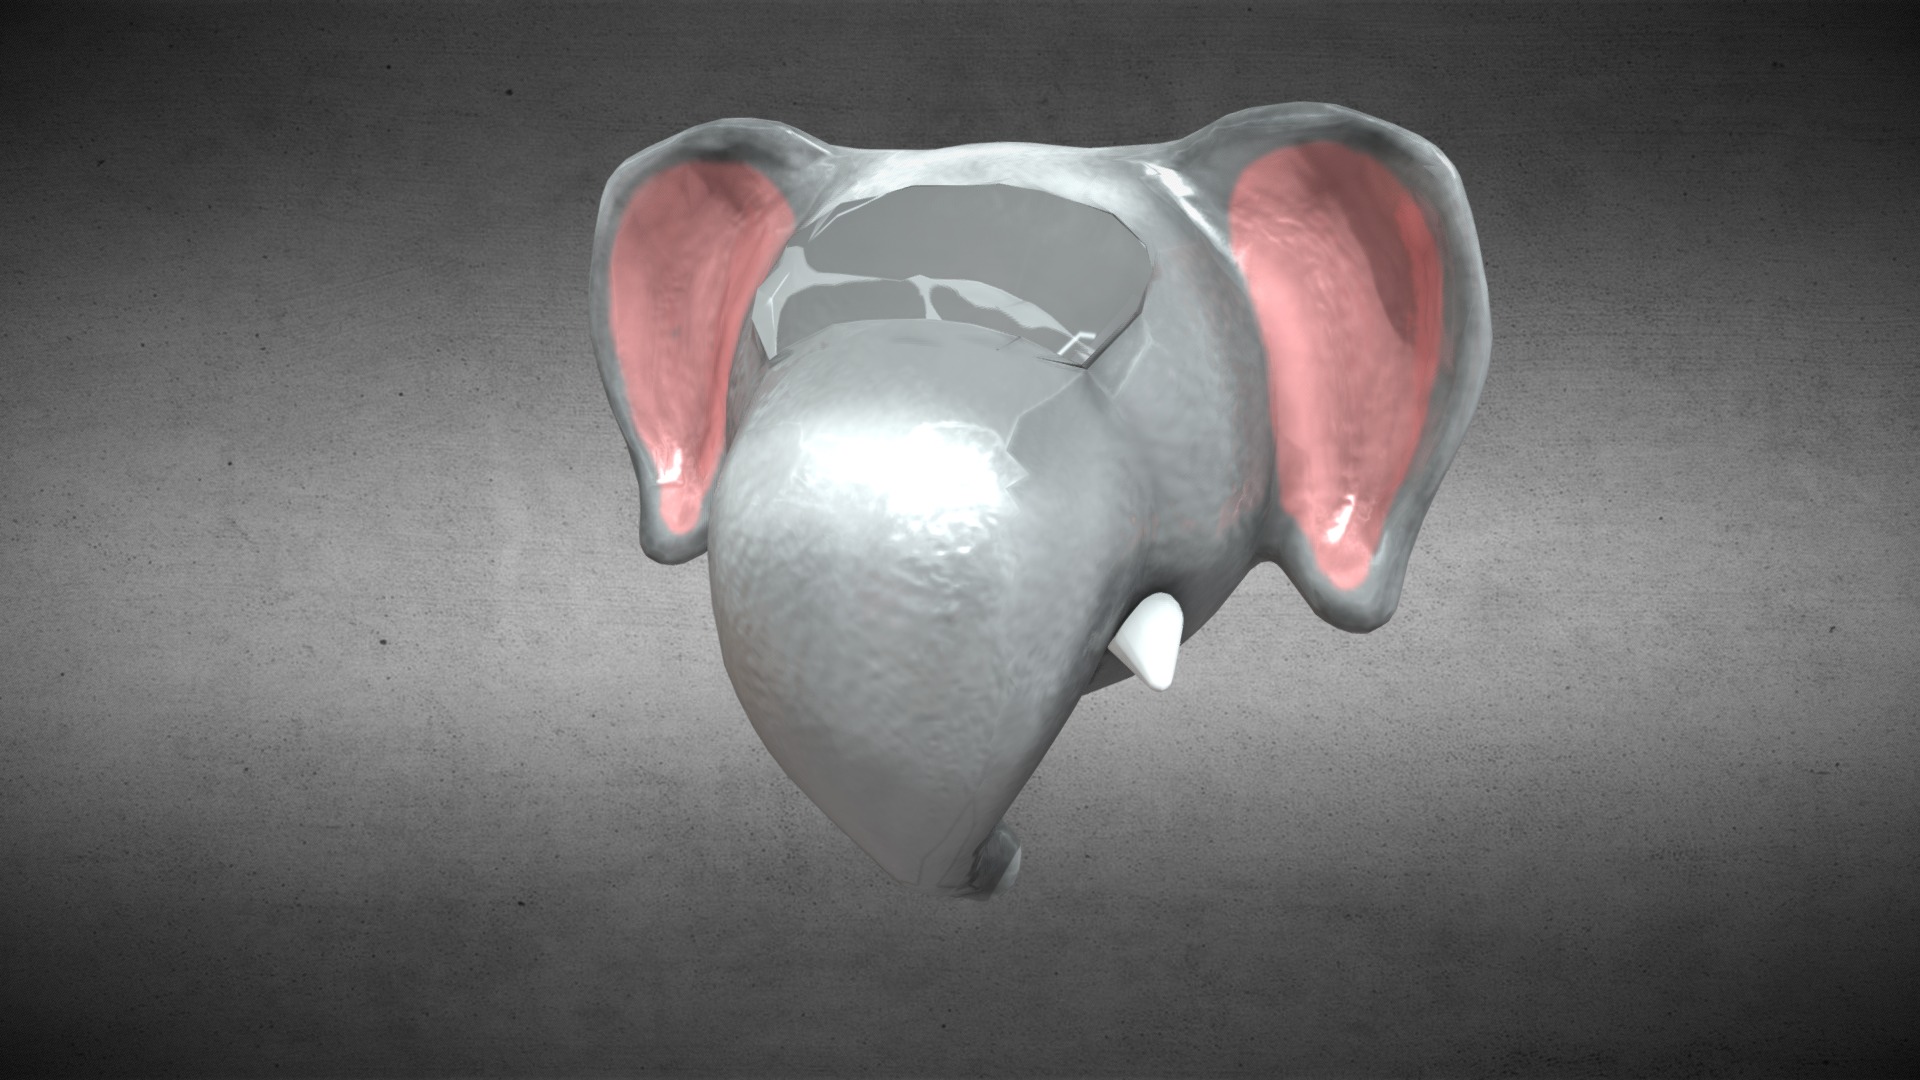 3D model Elephant Animated - This is a 3D model of the Elephant Animated. The 3D model is about a piggy bank on a black surface.